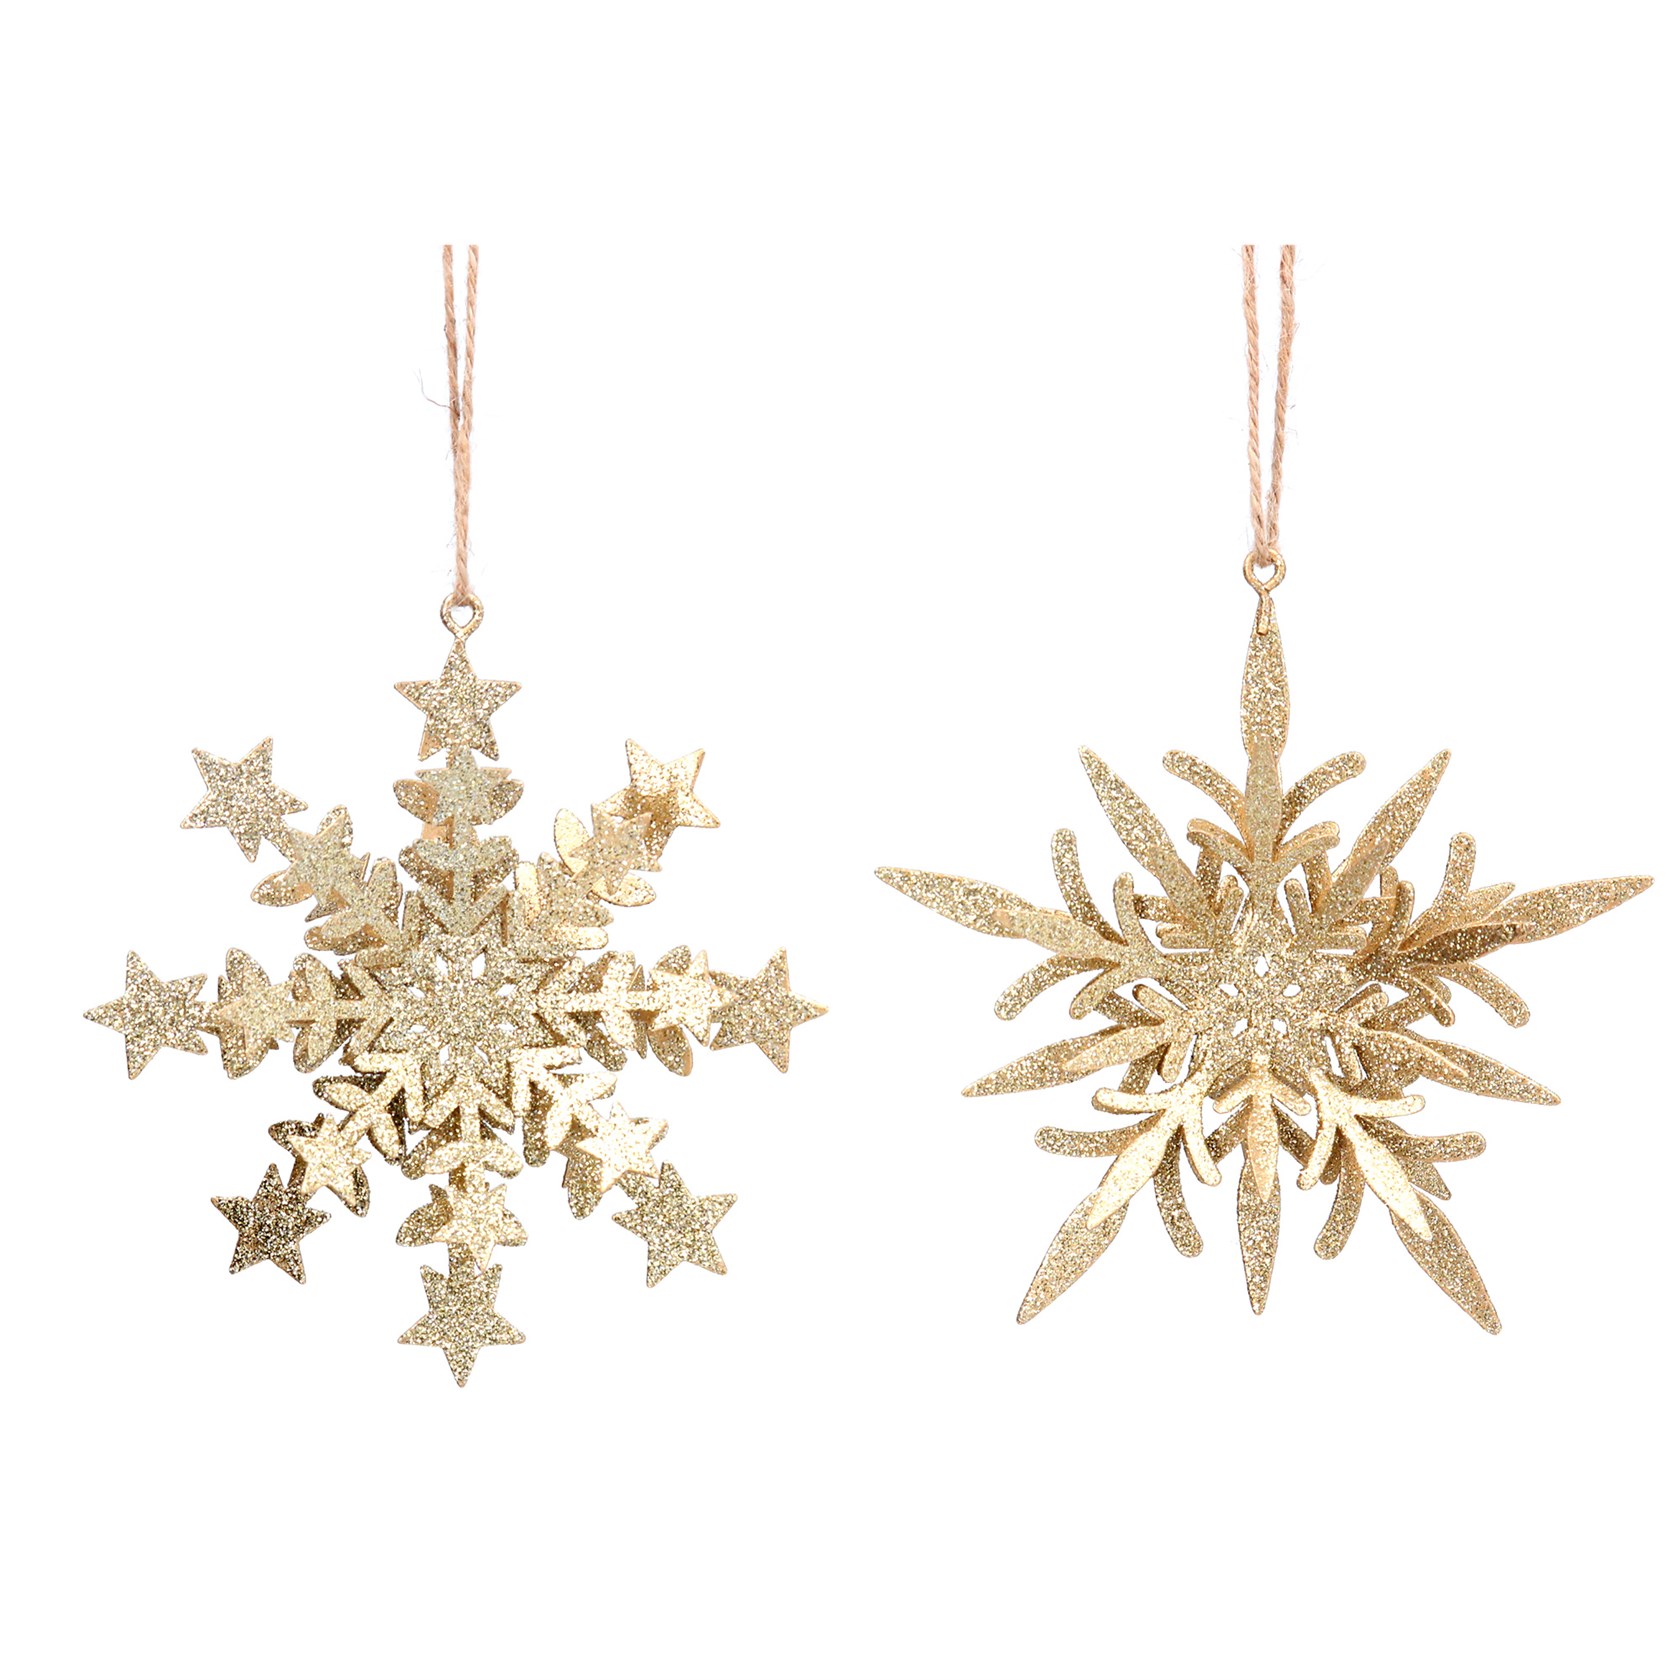 Gold metal snowflake hanging Christmas decoration. By Gisela Graham. The perfect festive addition to your home.